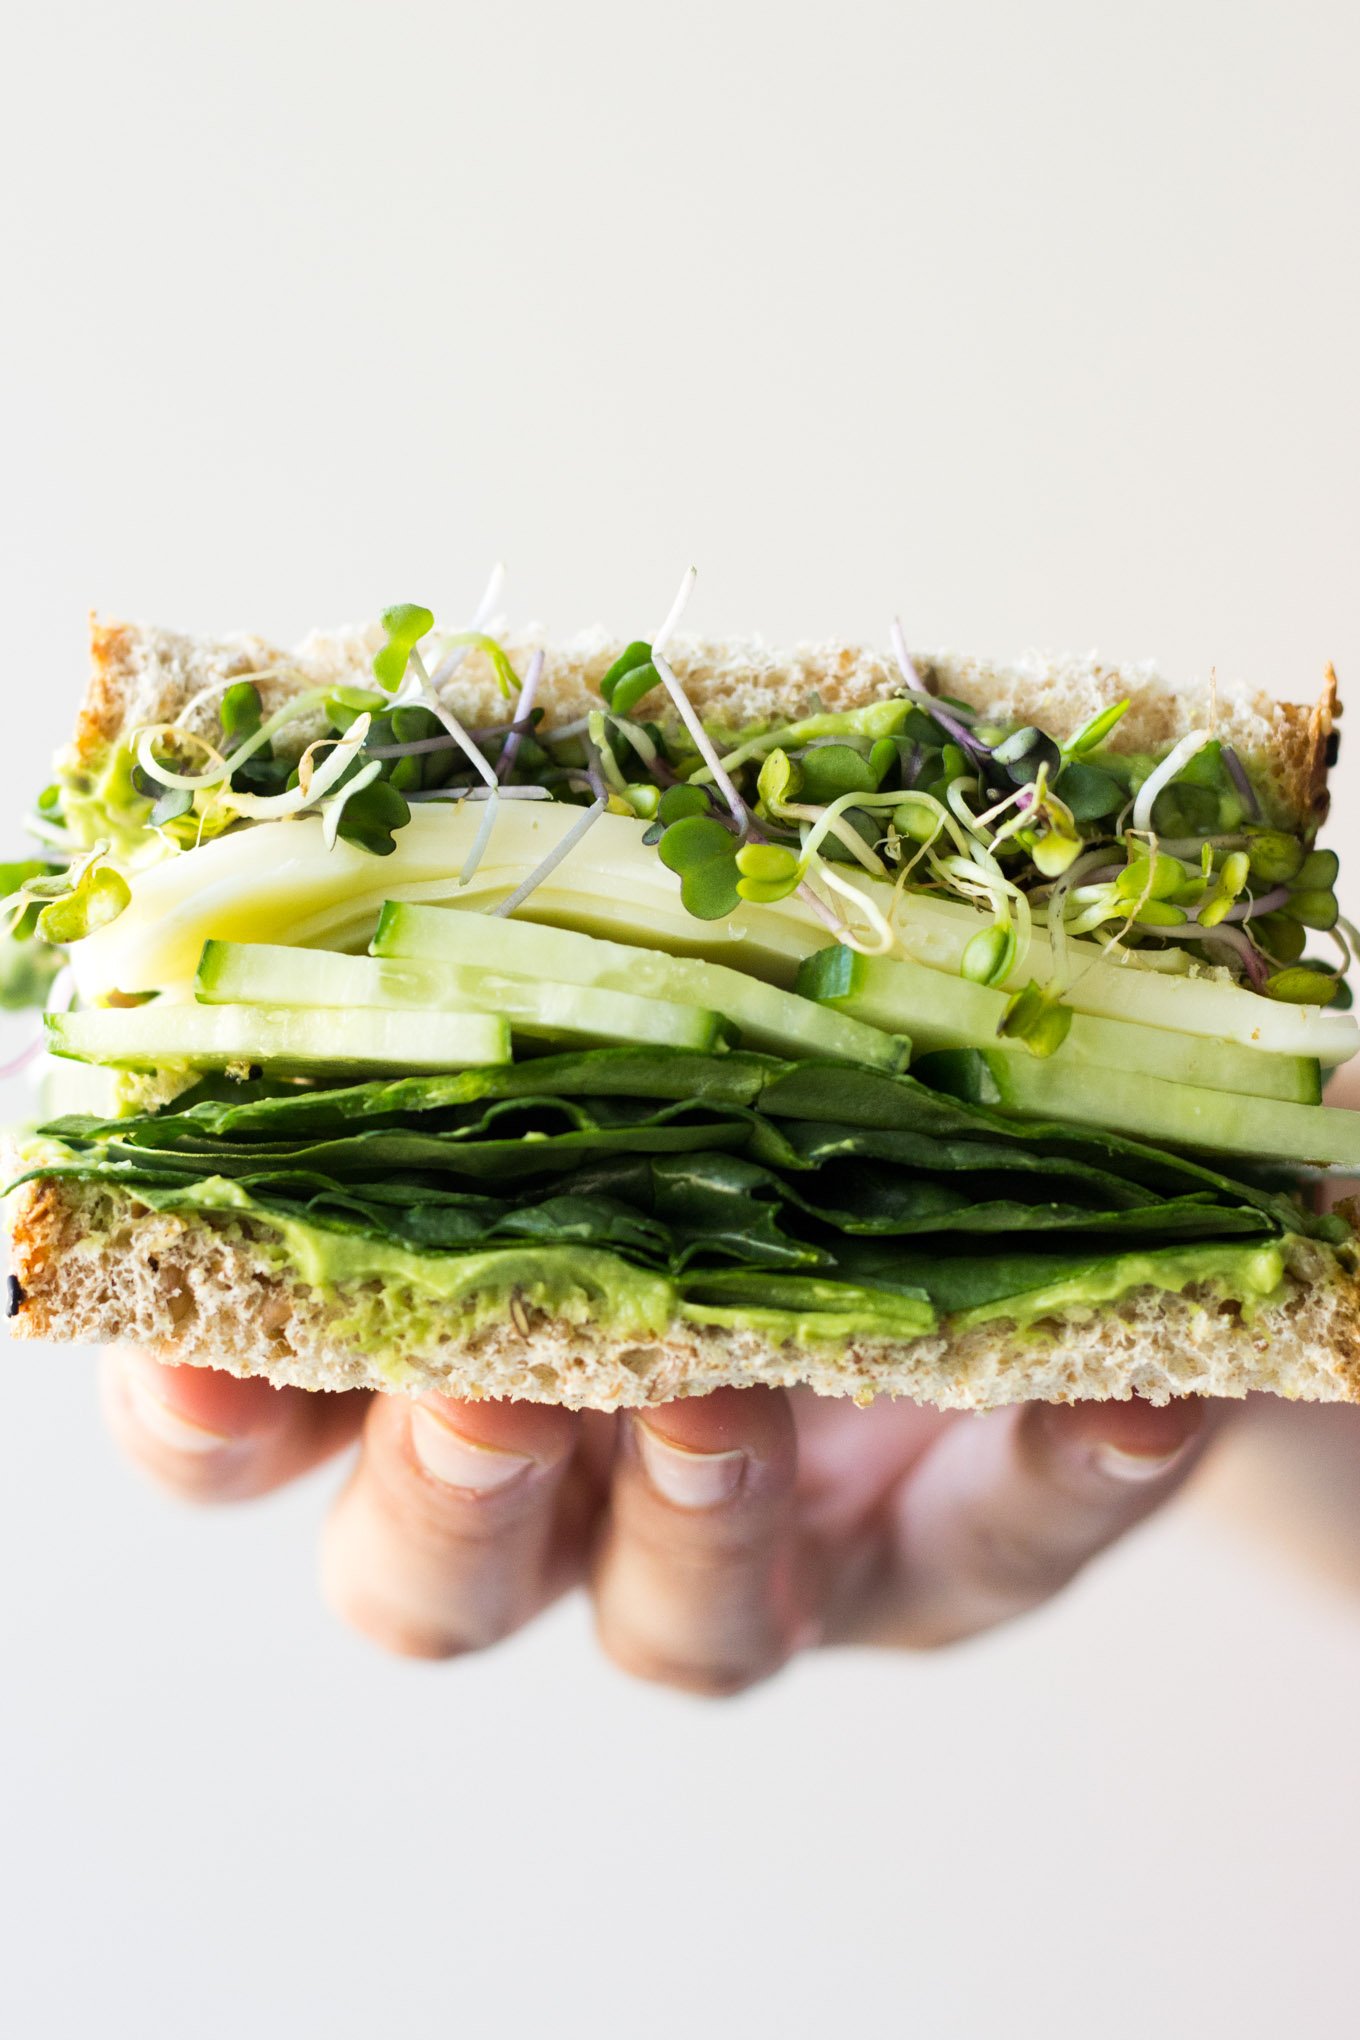 Super Greens Sandwich - a healthy, quick, nutritious lunch perfect for busy weekdays! | Fork in the Kitchen